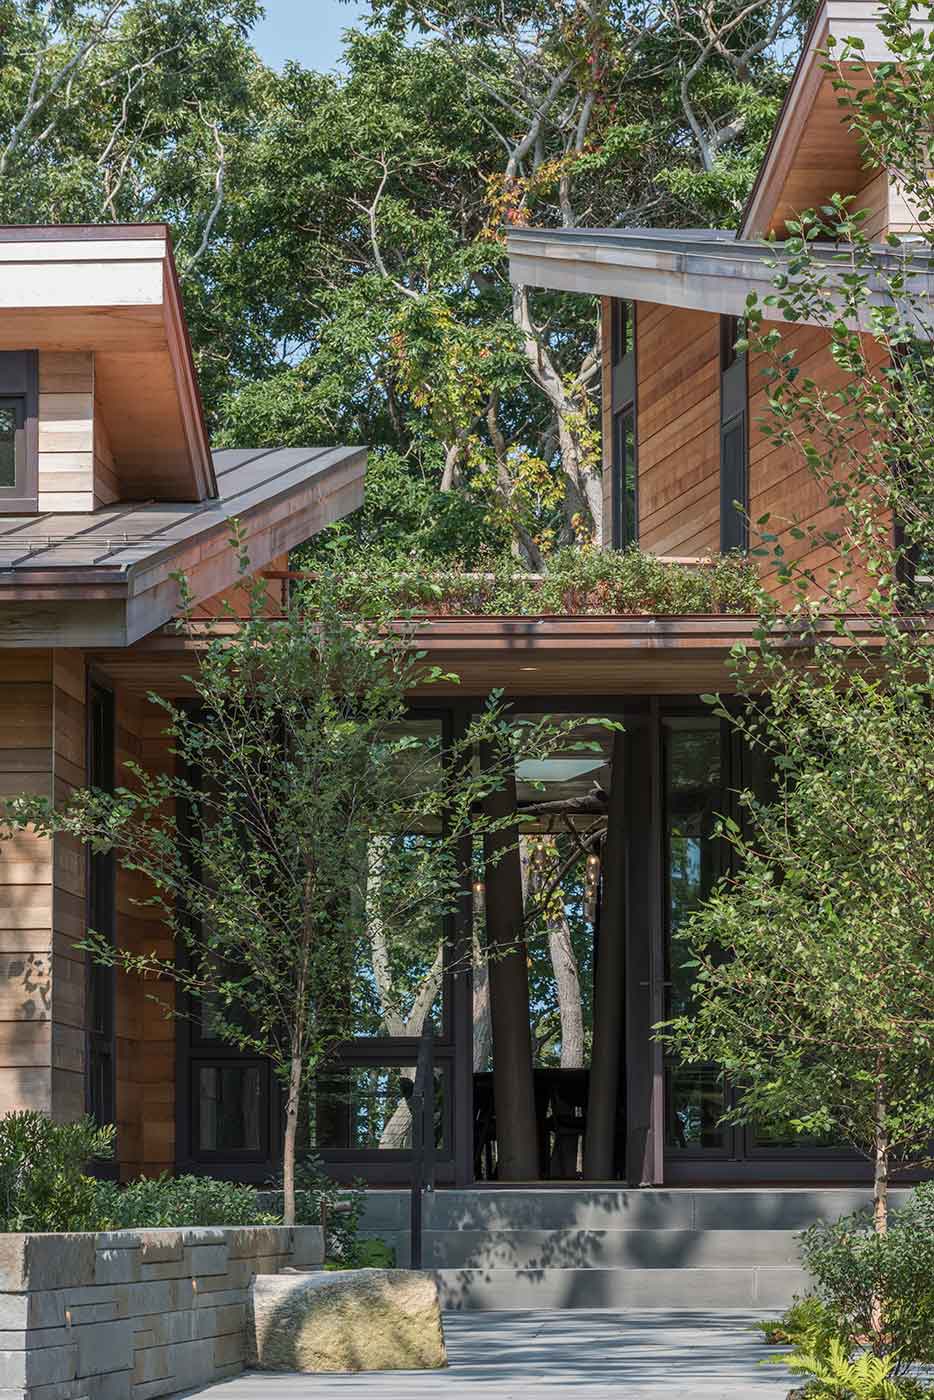 Architecture rooted in nature by Jill Neubauer Architects with landscape architecture by Bernice Wahler Landscapes